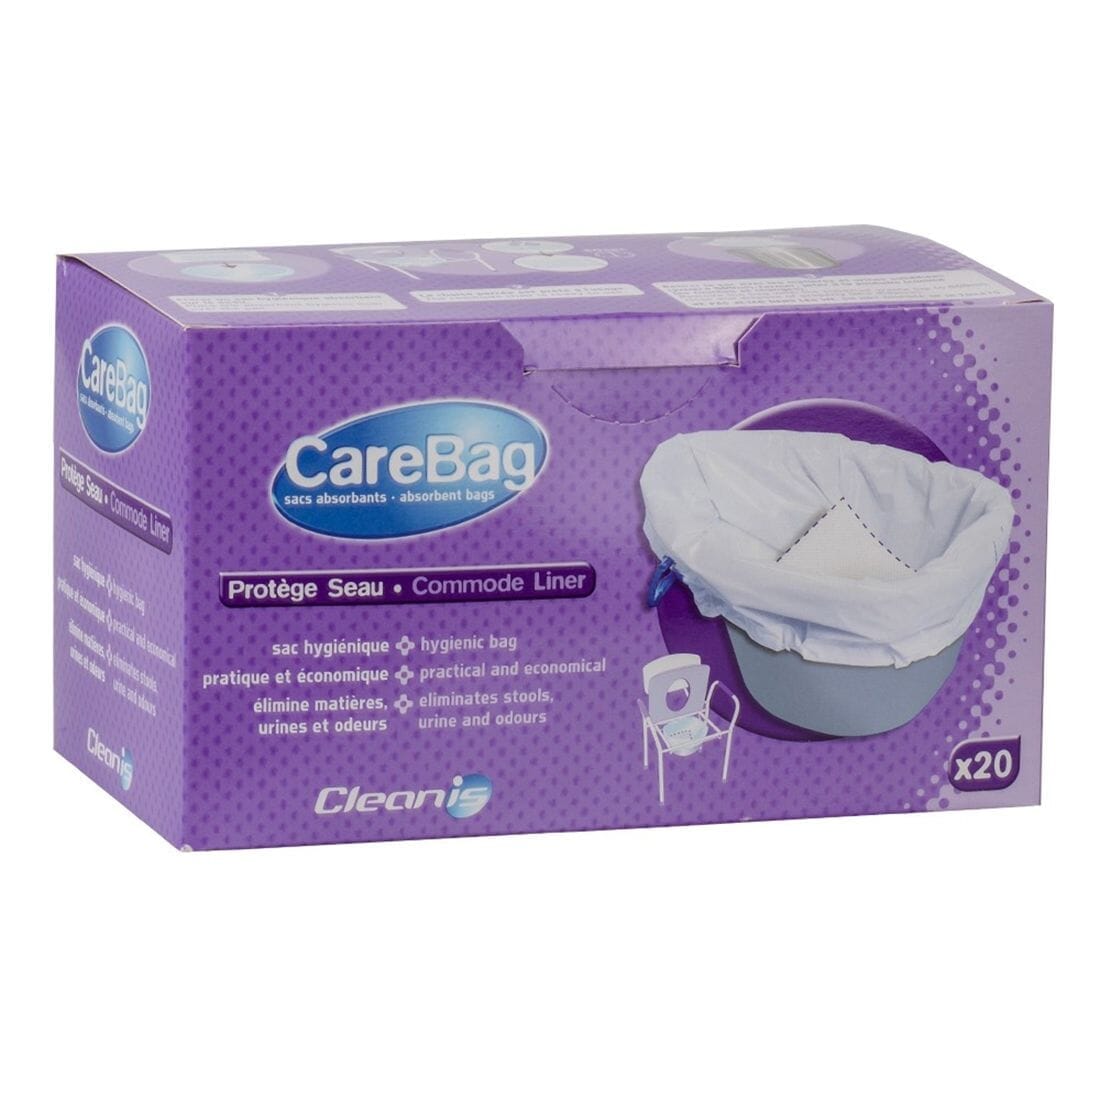 View Carebag Commode Liner 1 pack of 20 bags information